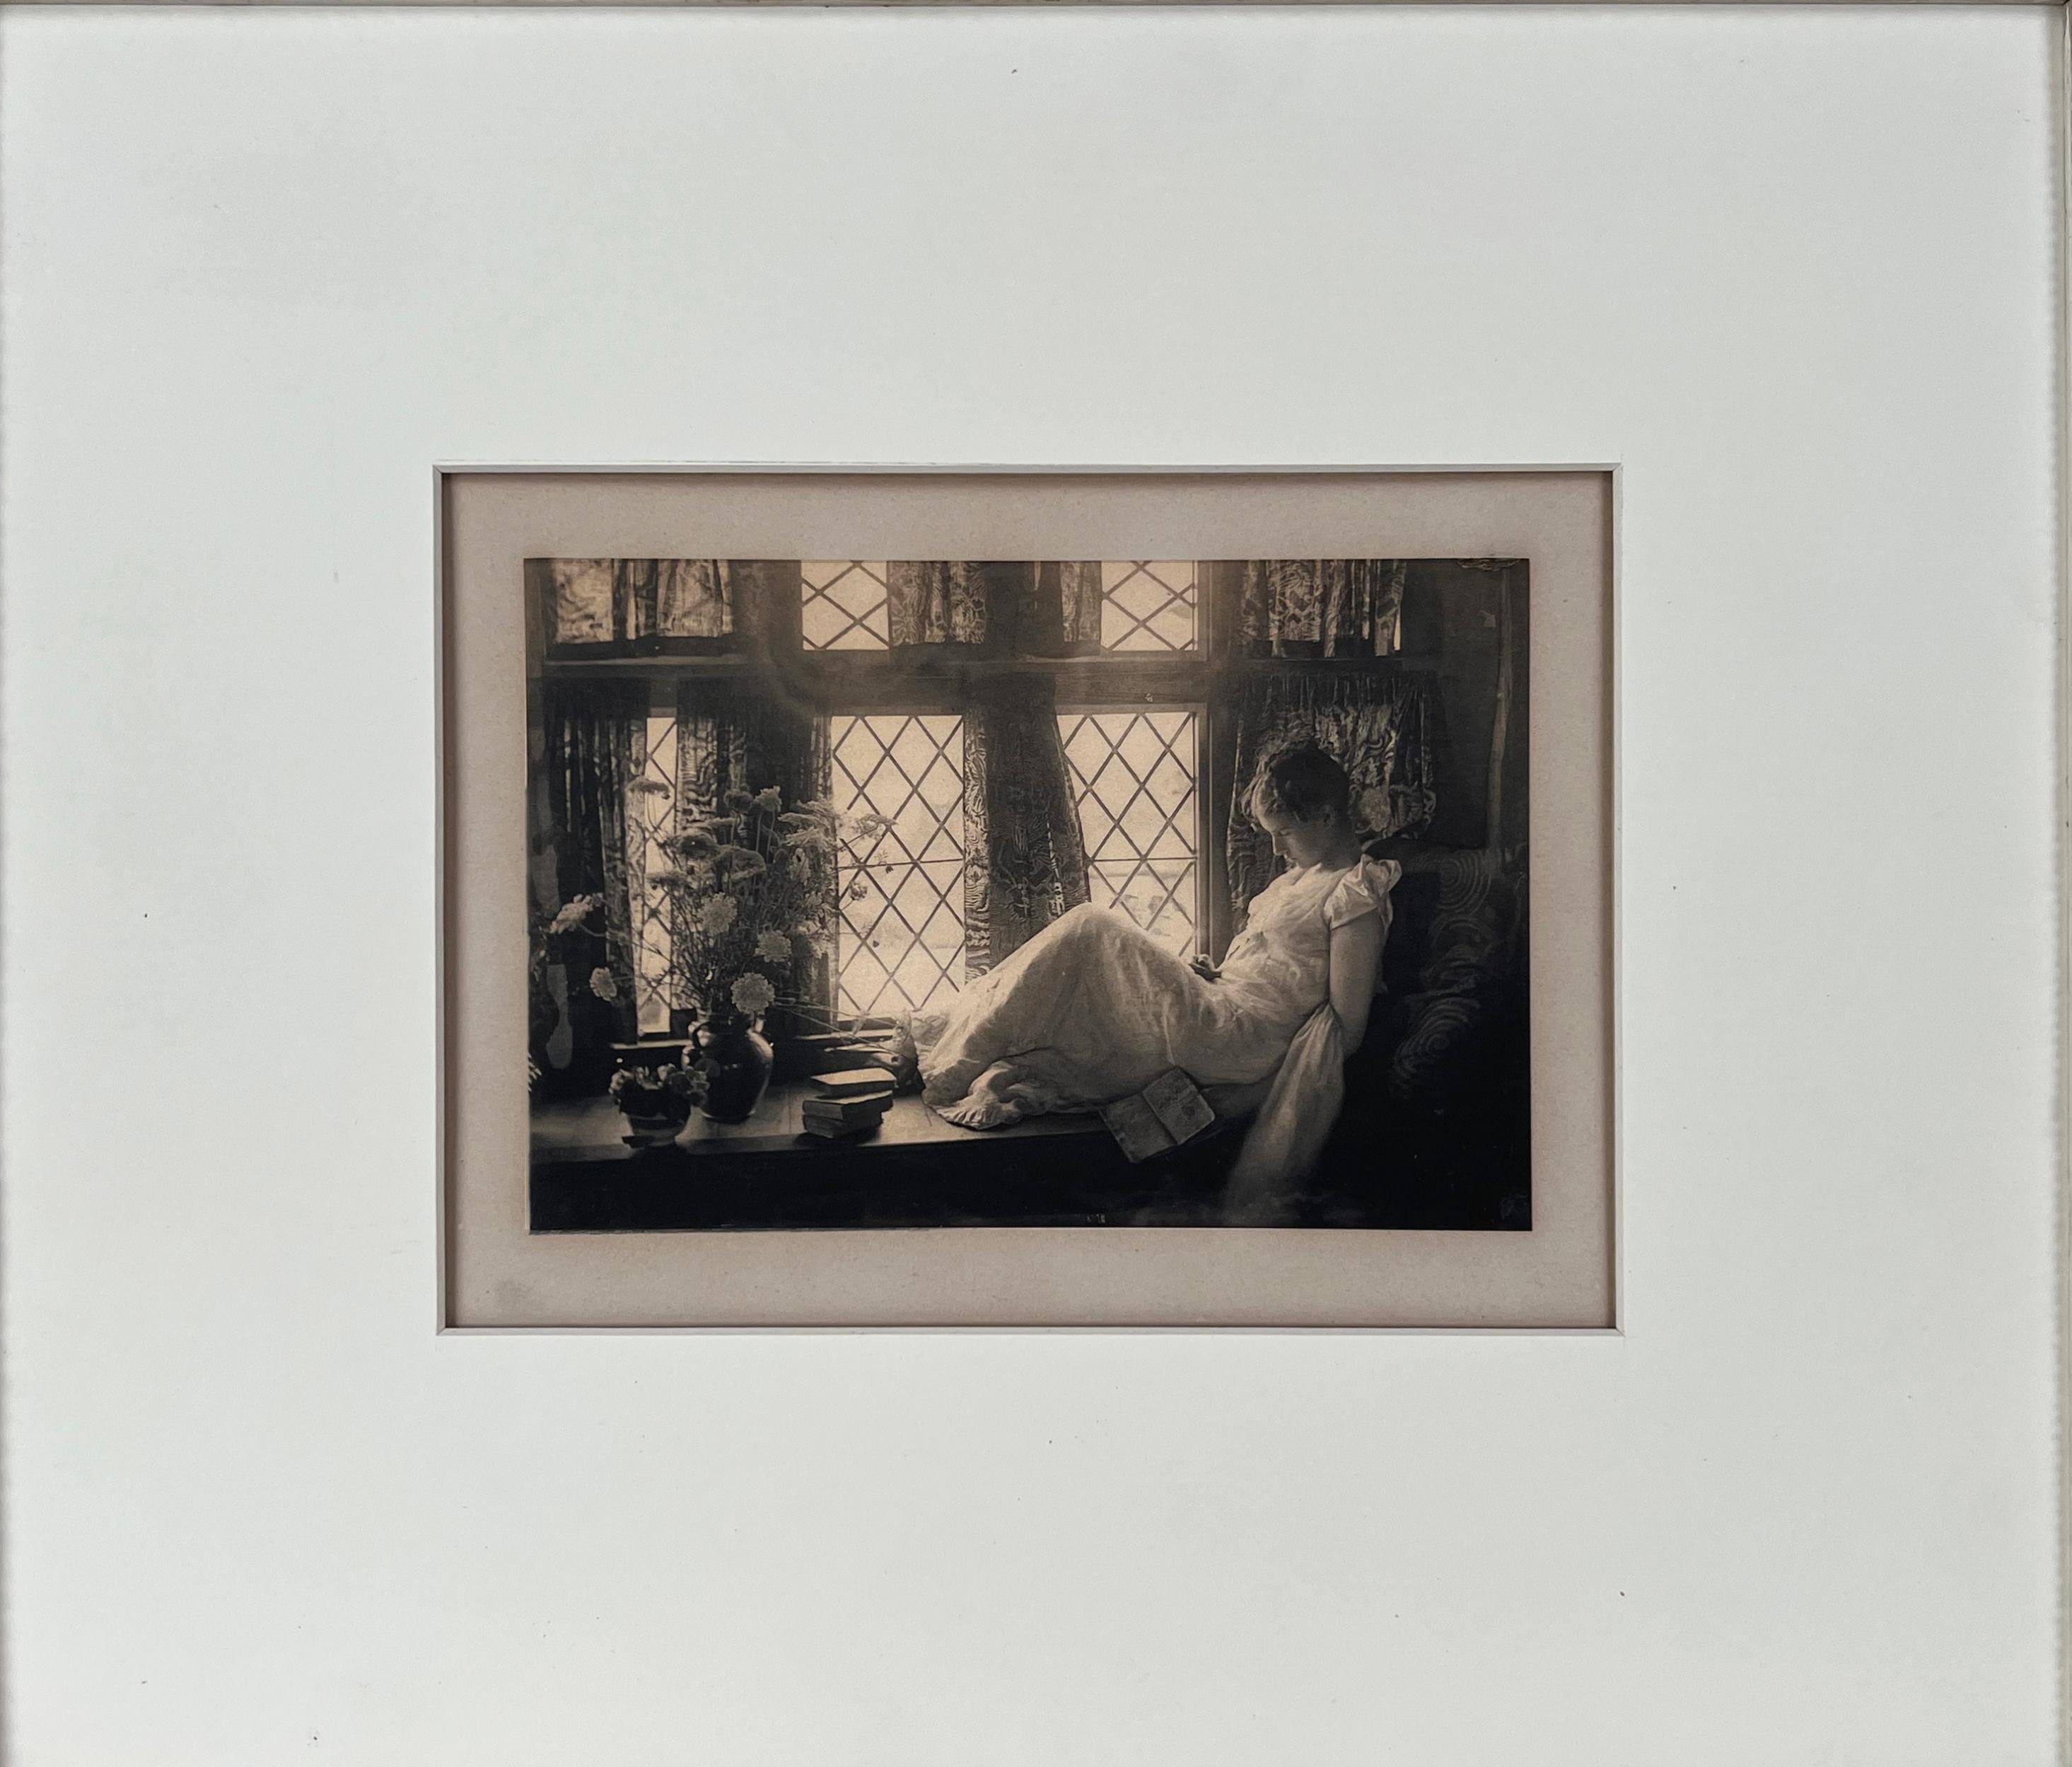 Young Girl Asleep in the Window - Poetry Reading 1904 - Photogravure - Print by Emma Justin Farnsworth